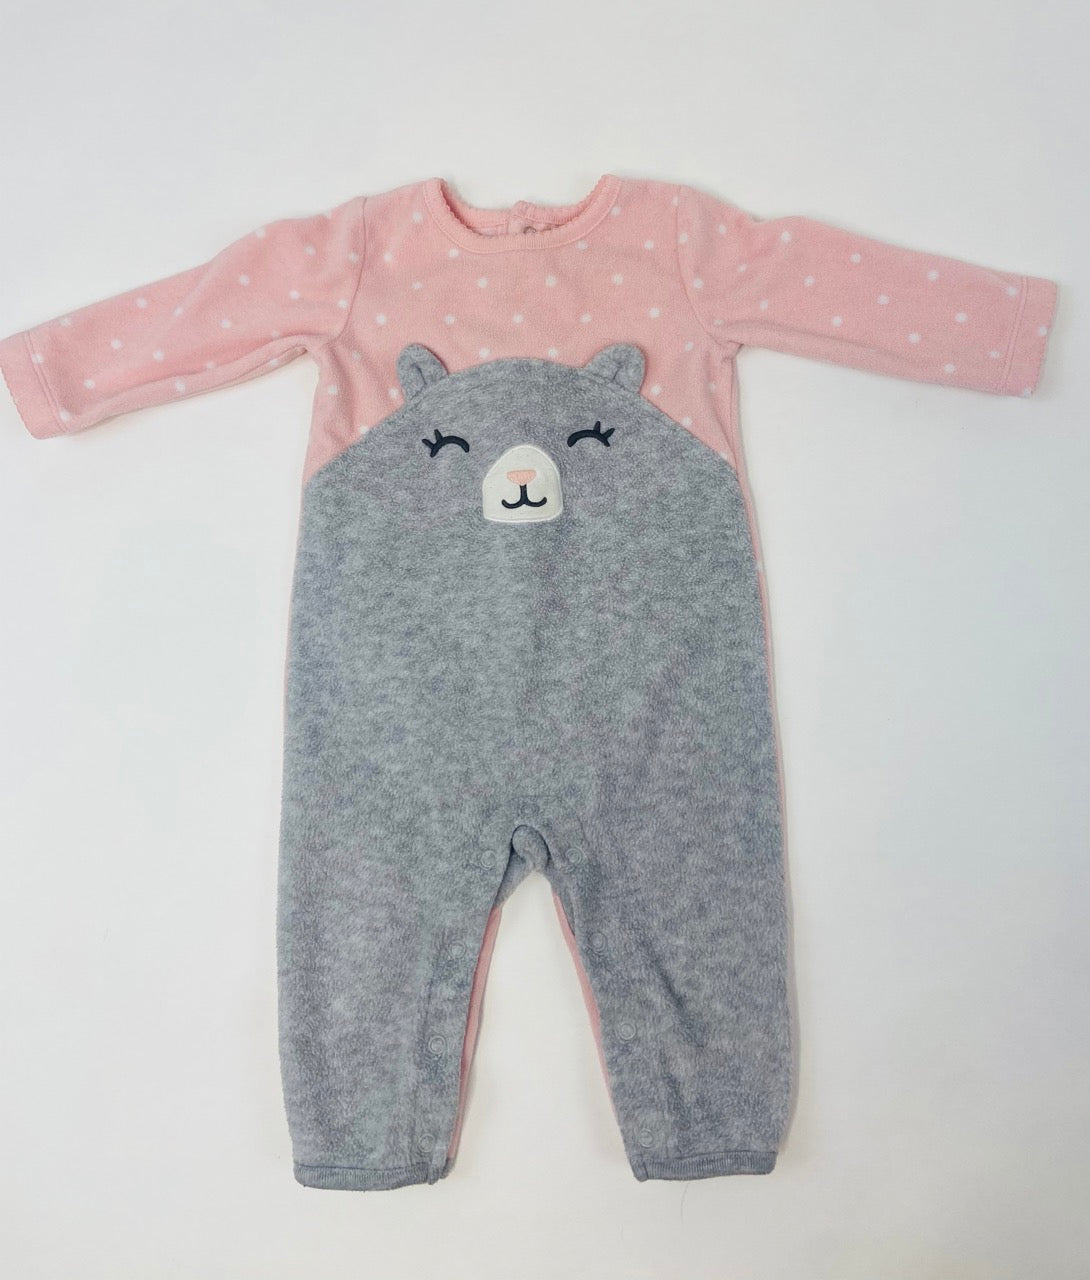 Cozy Bear Outfit - 6 Months